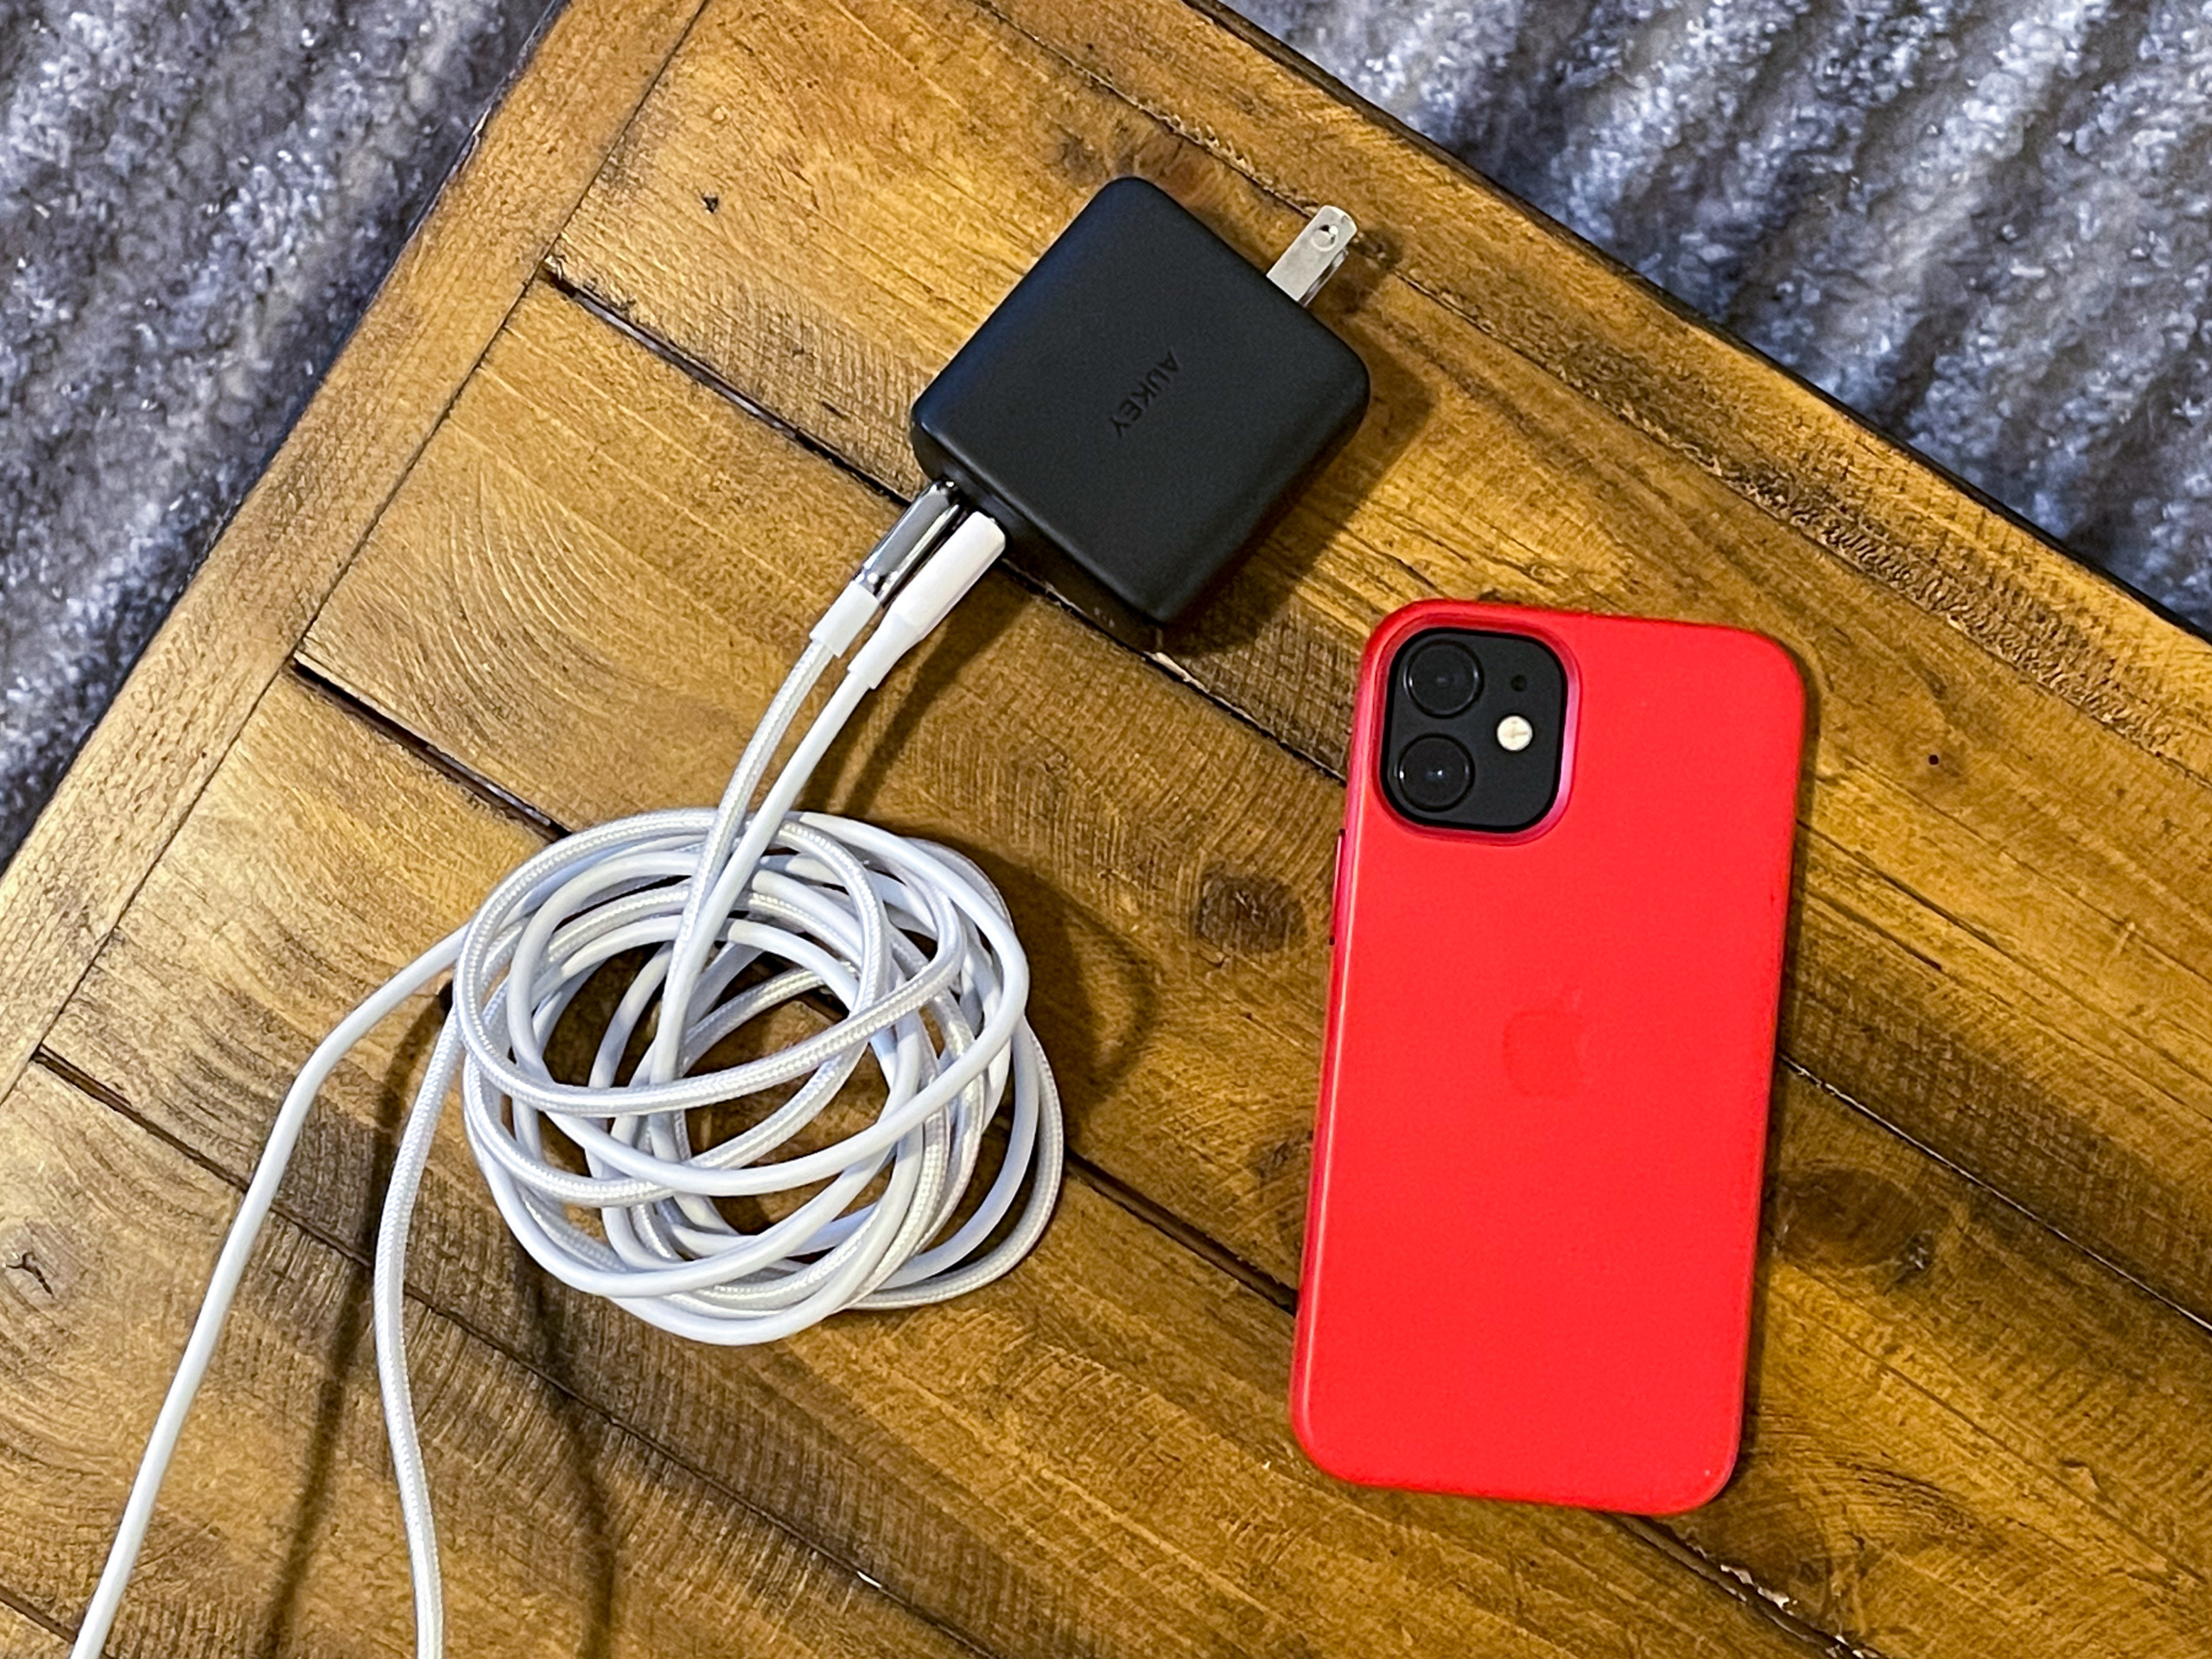 Here's how you can easily fast charge your iPhone